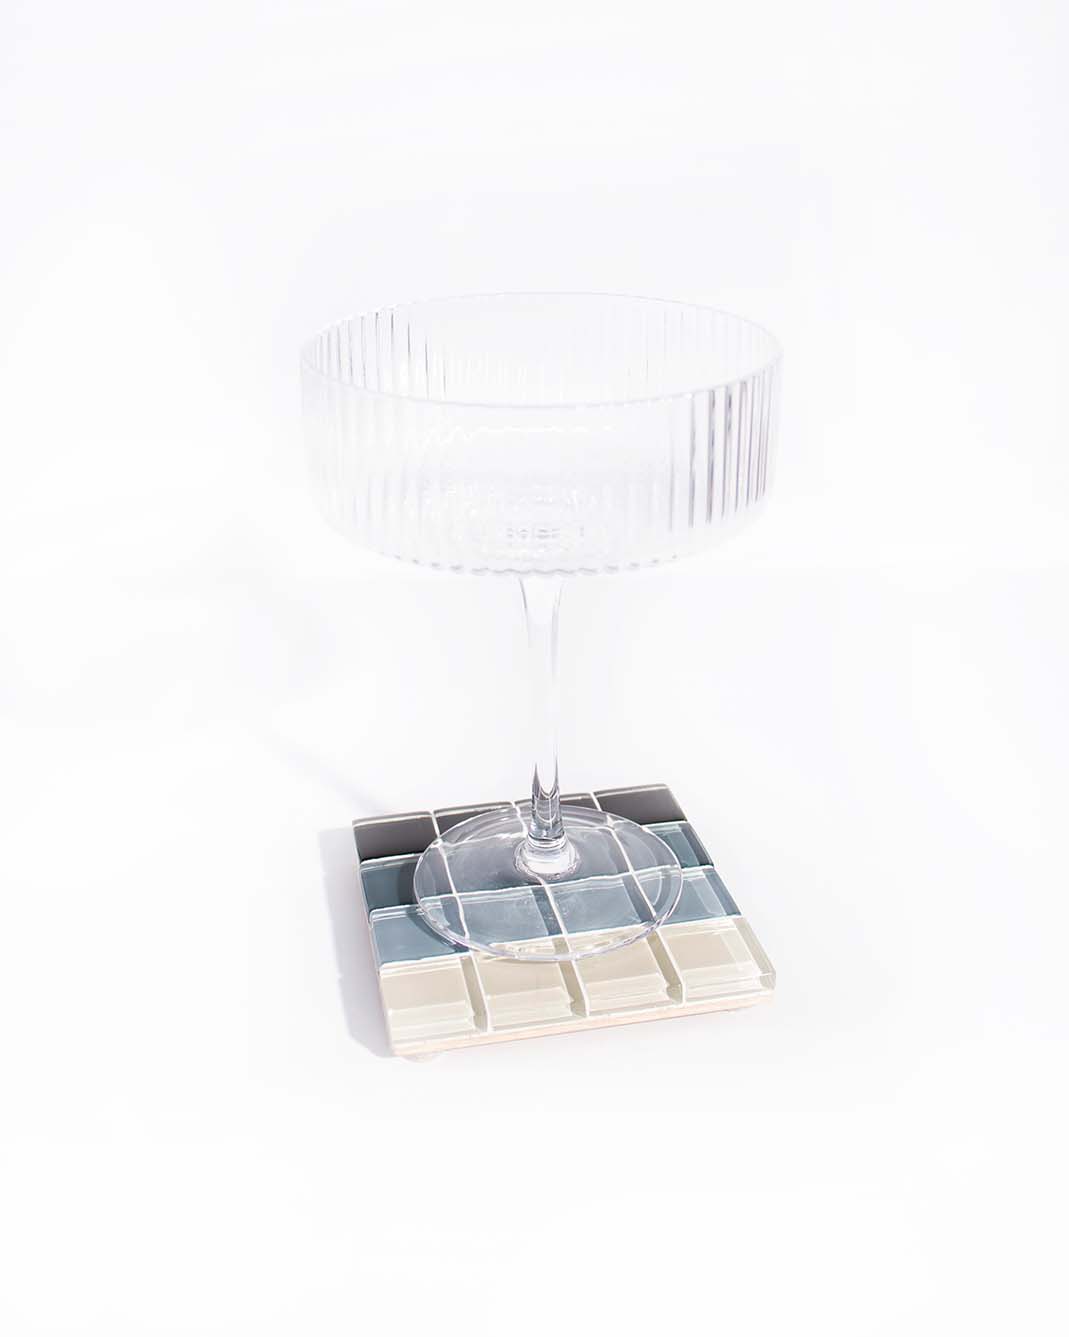 GLASS TILE COASTER - Ombre - Midnight City